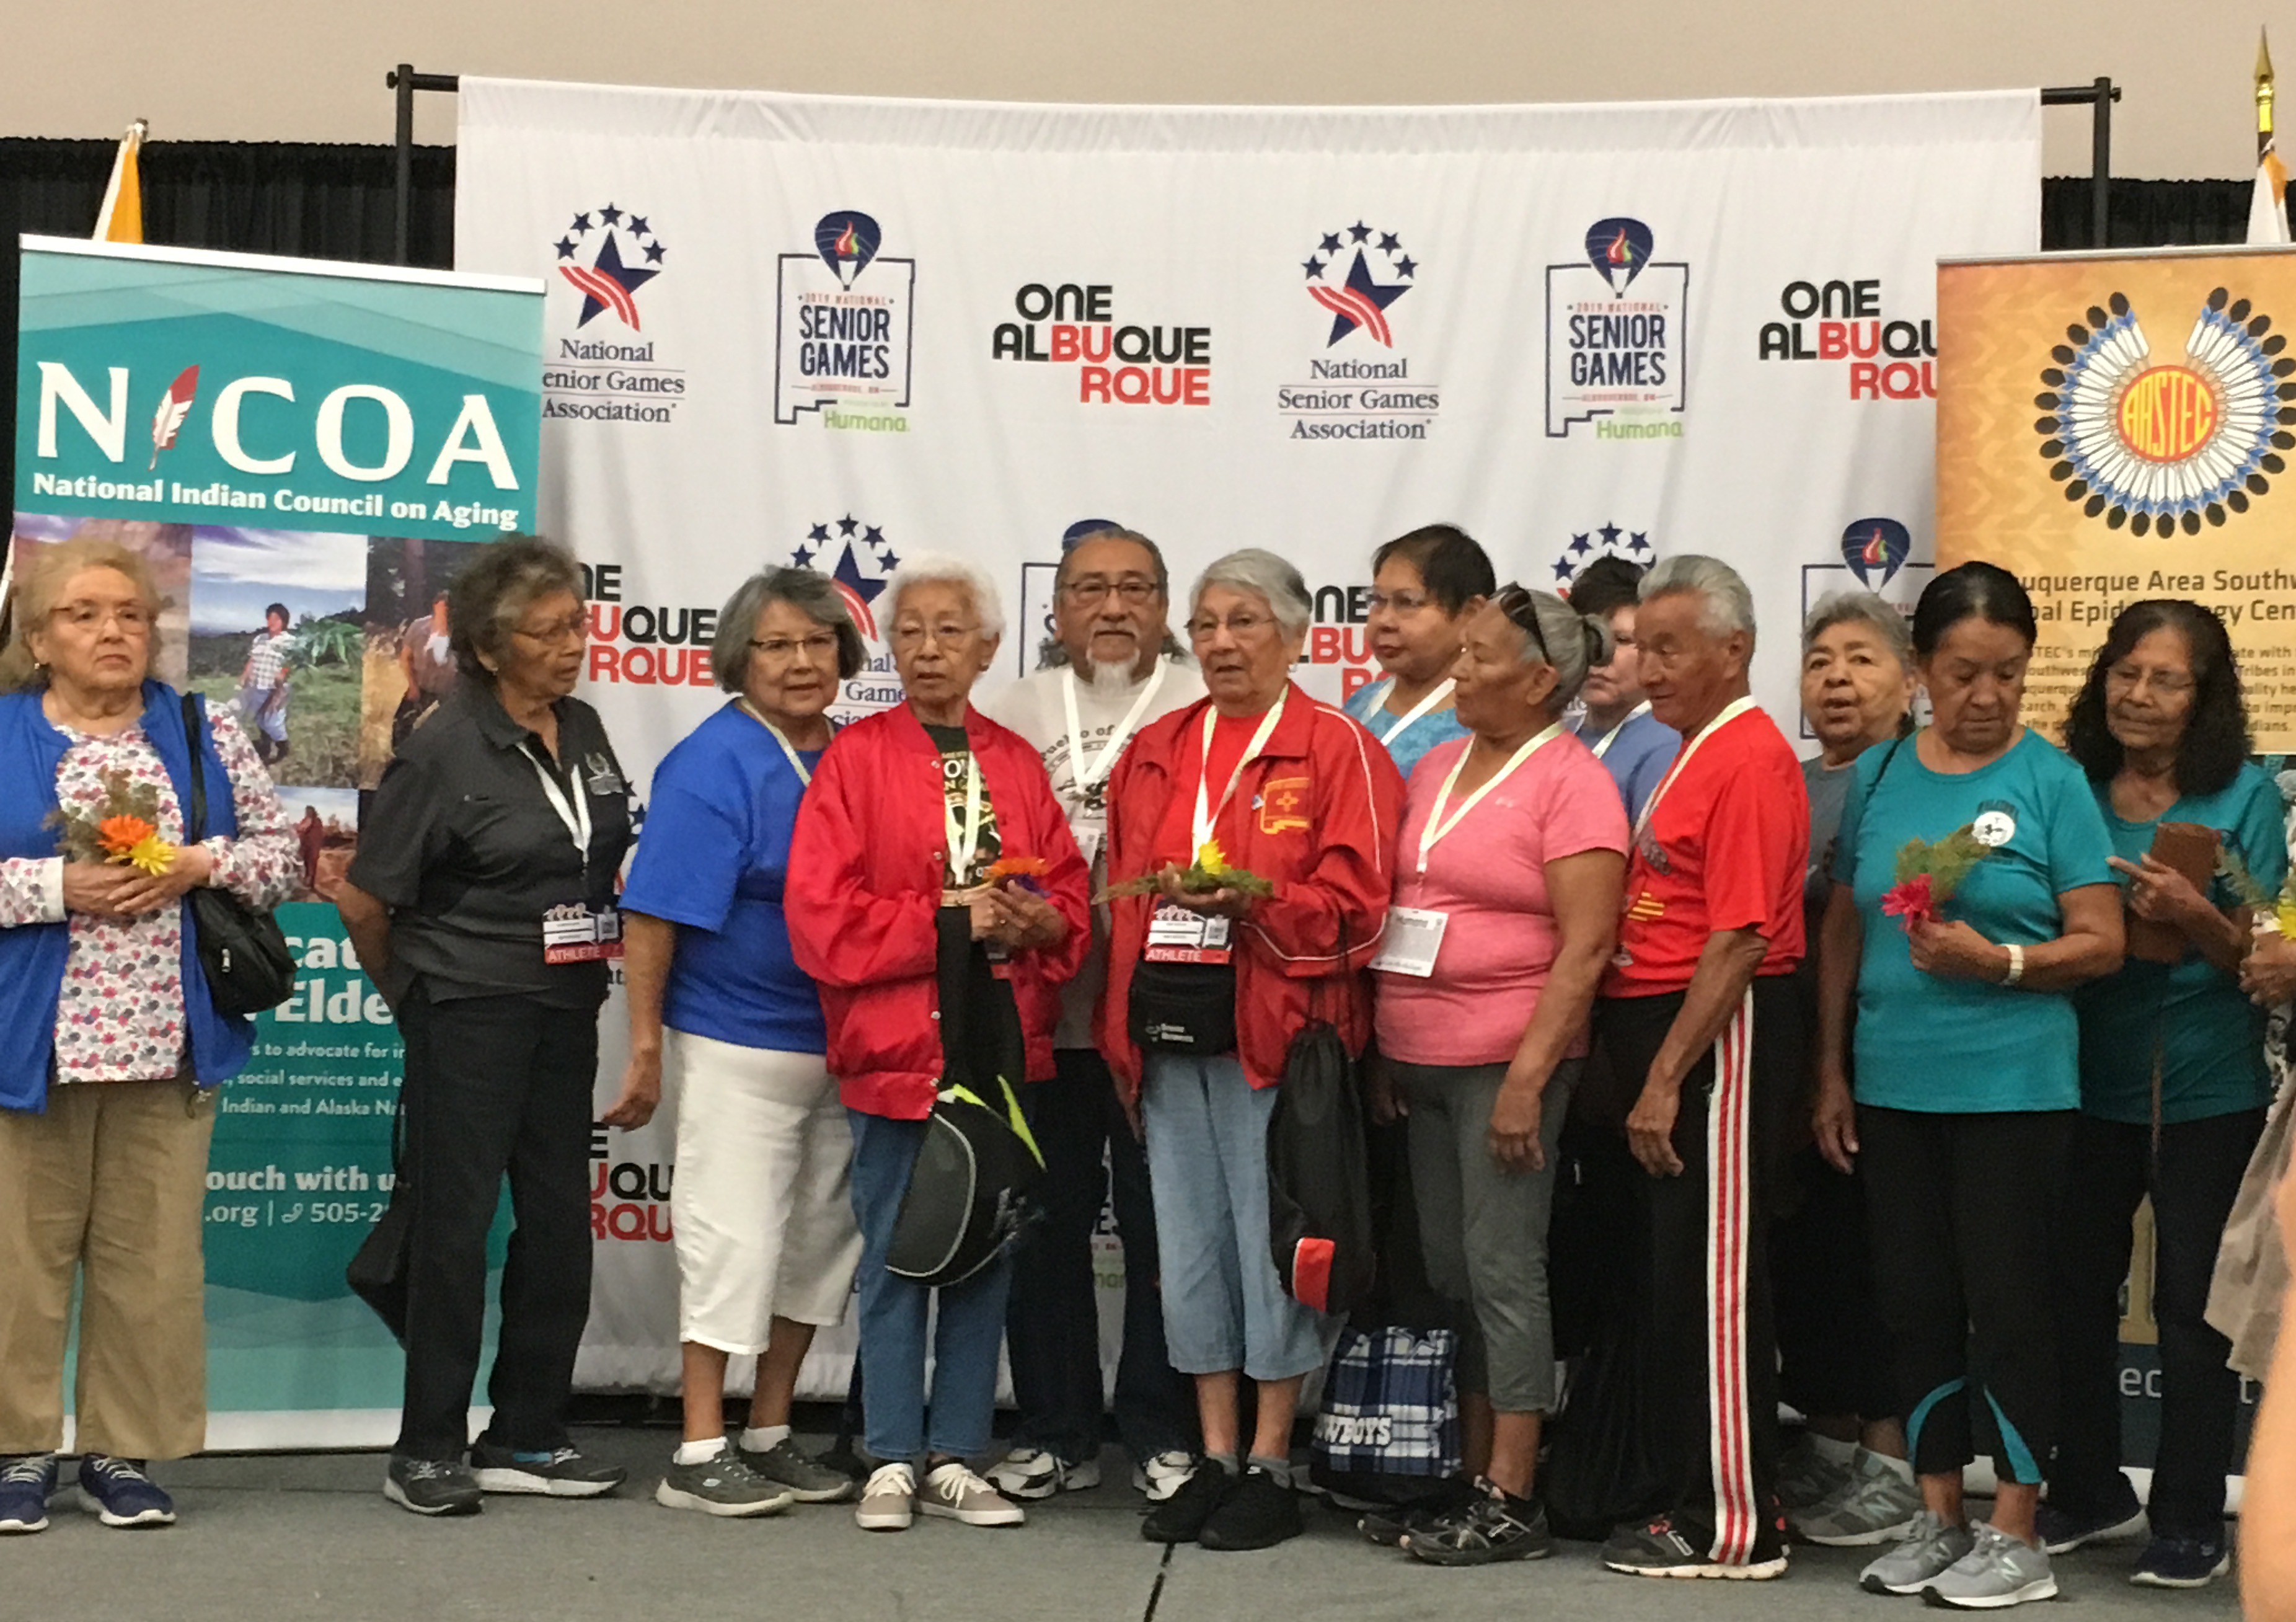 Elders Come for Indian Day at the National Senior Games